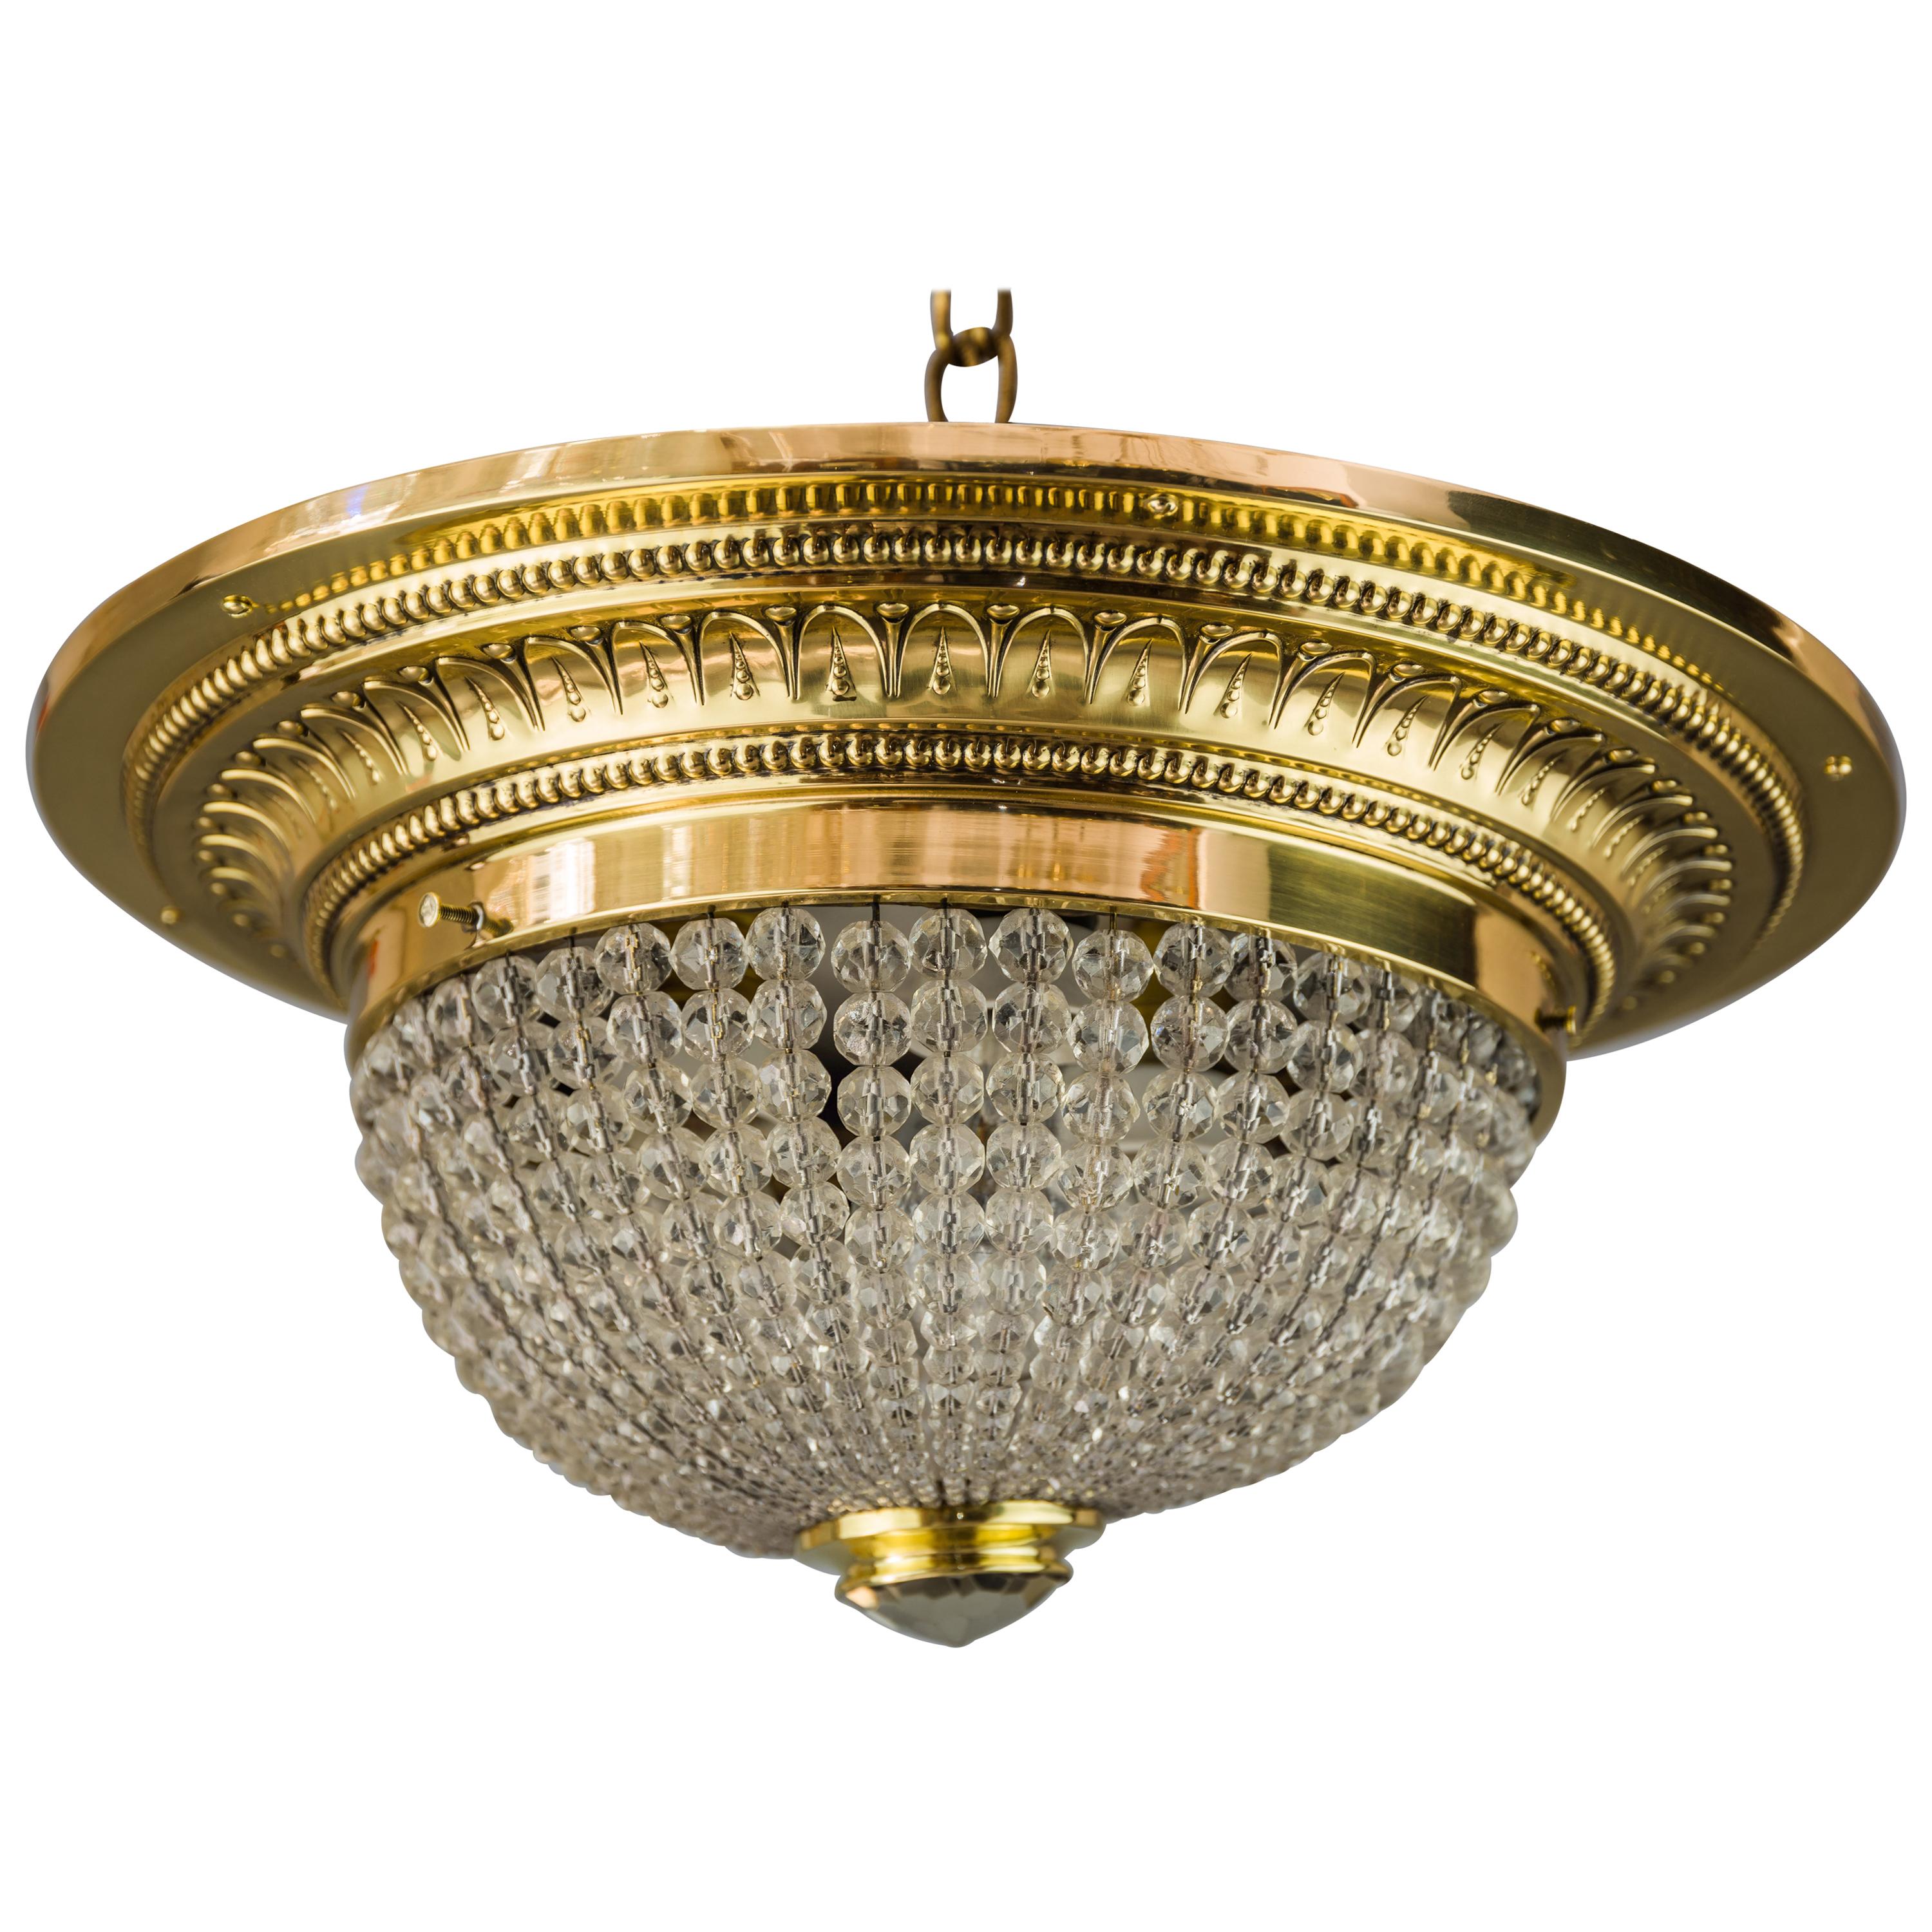 Art Deco Ceiling Lamp with Small Cut Glass Balls, circa 1920s For Sale